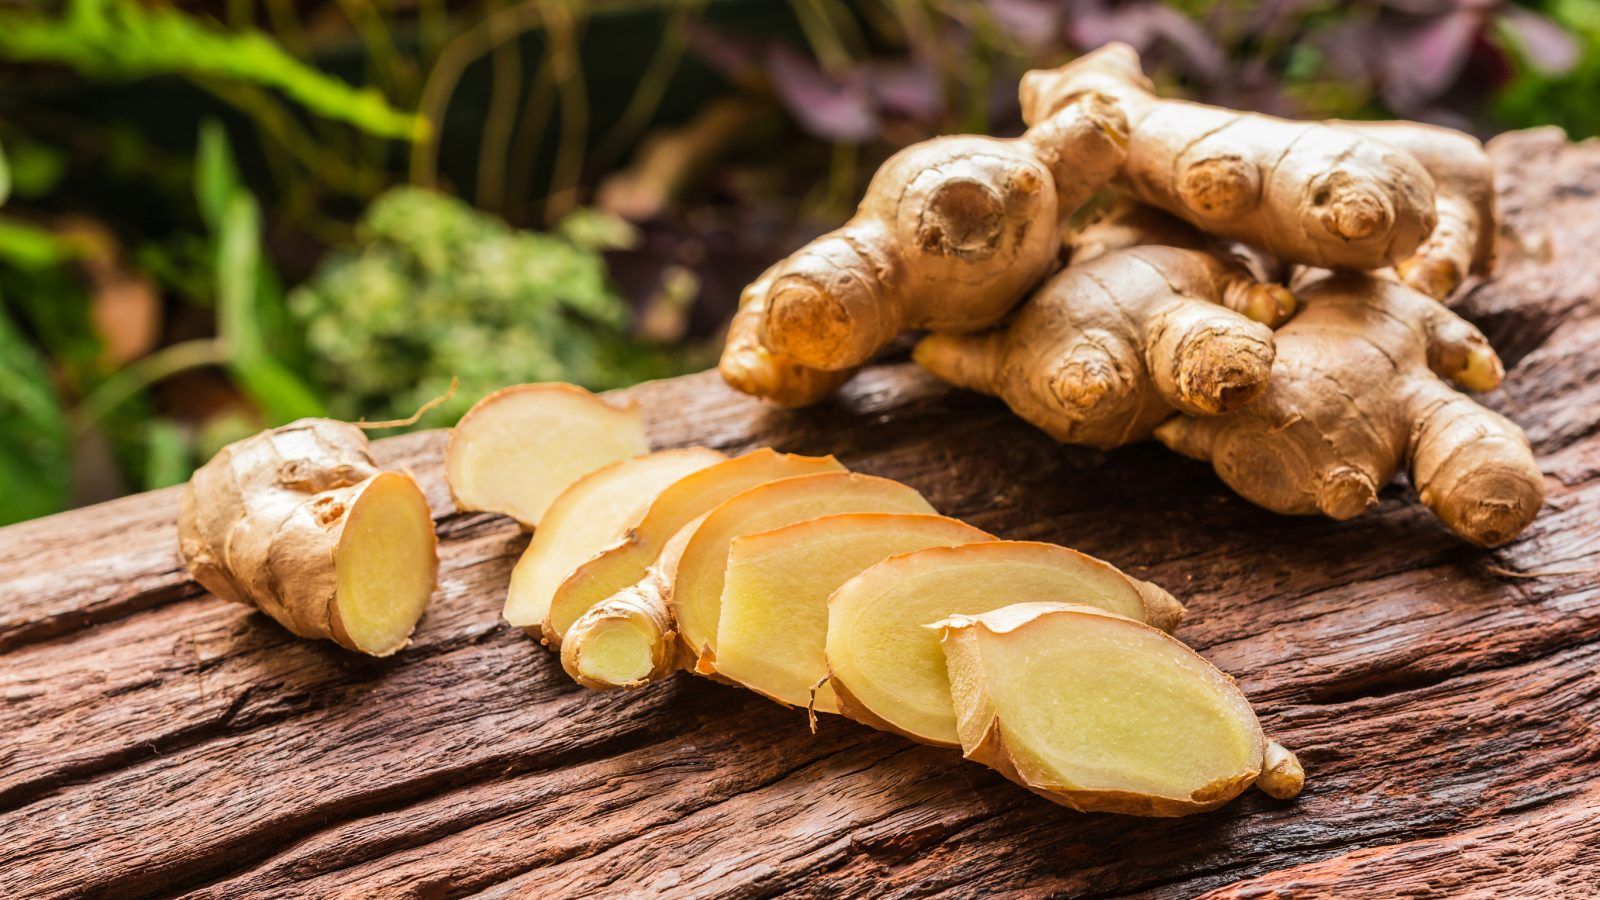 Health benefits of ginger: Here’s everything to know about the fiery root